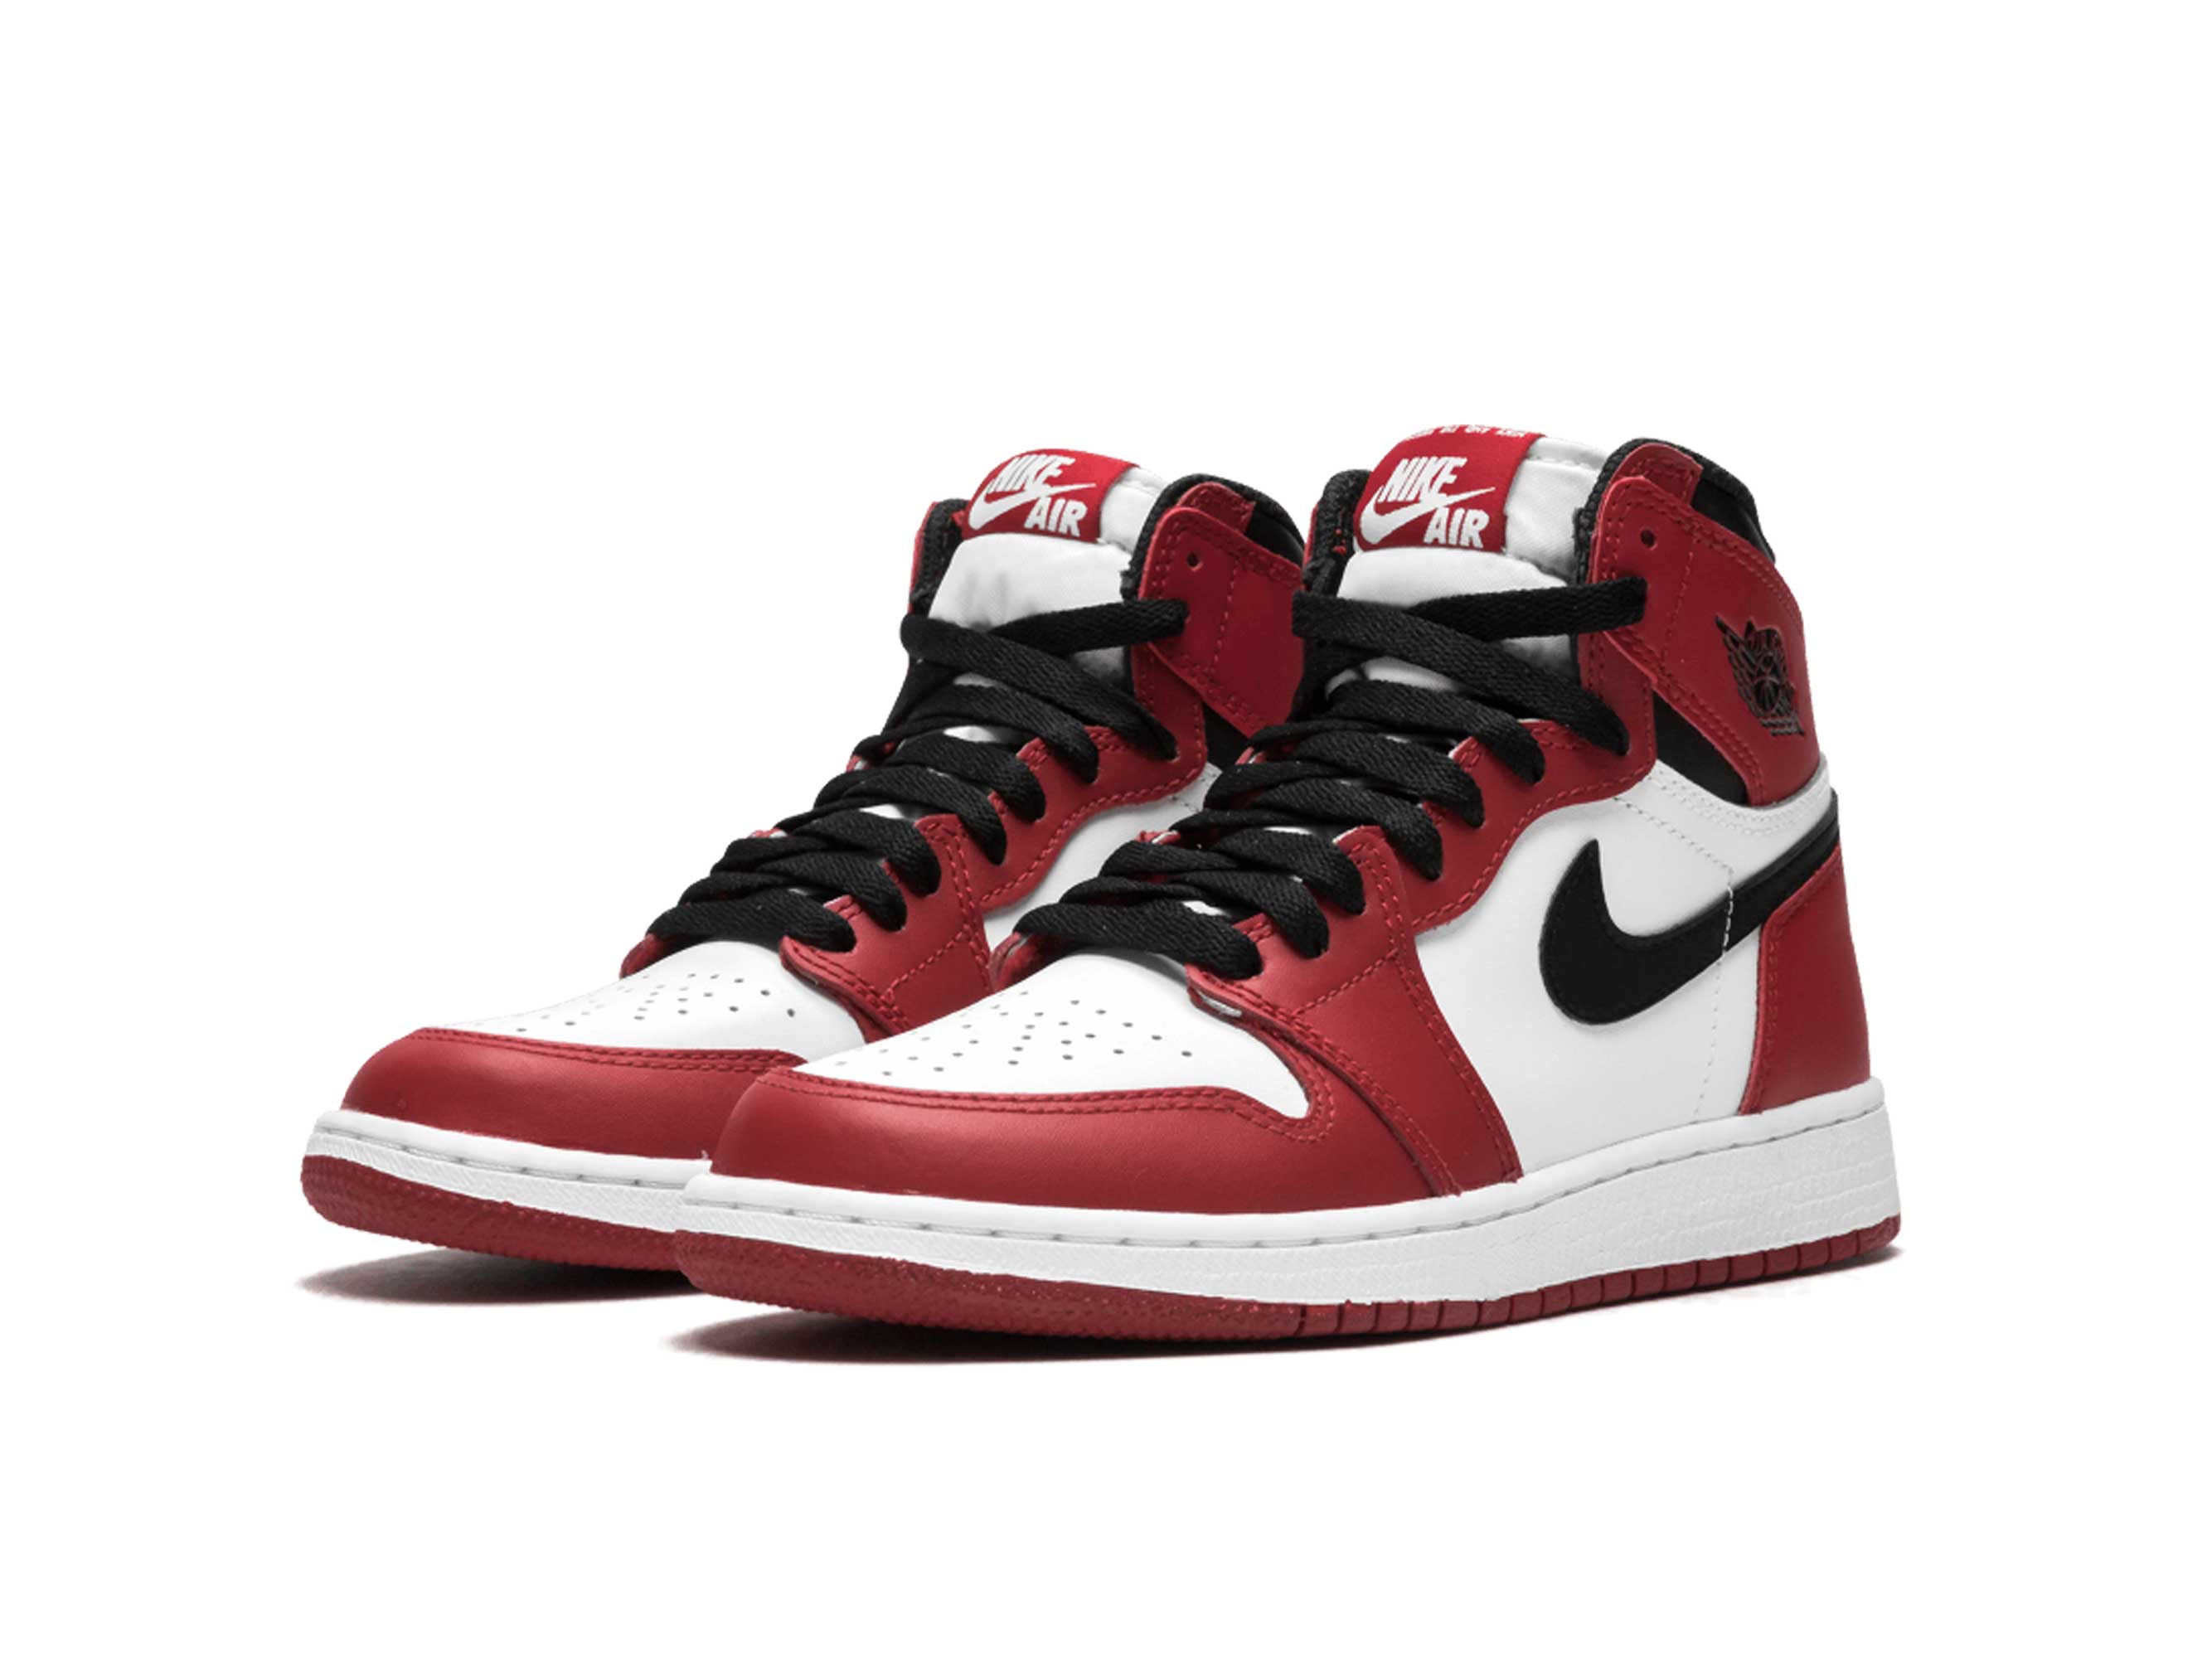 red and white nike jordans